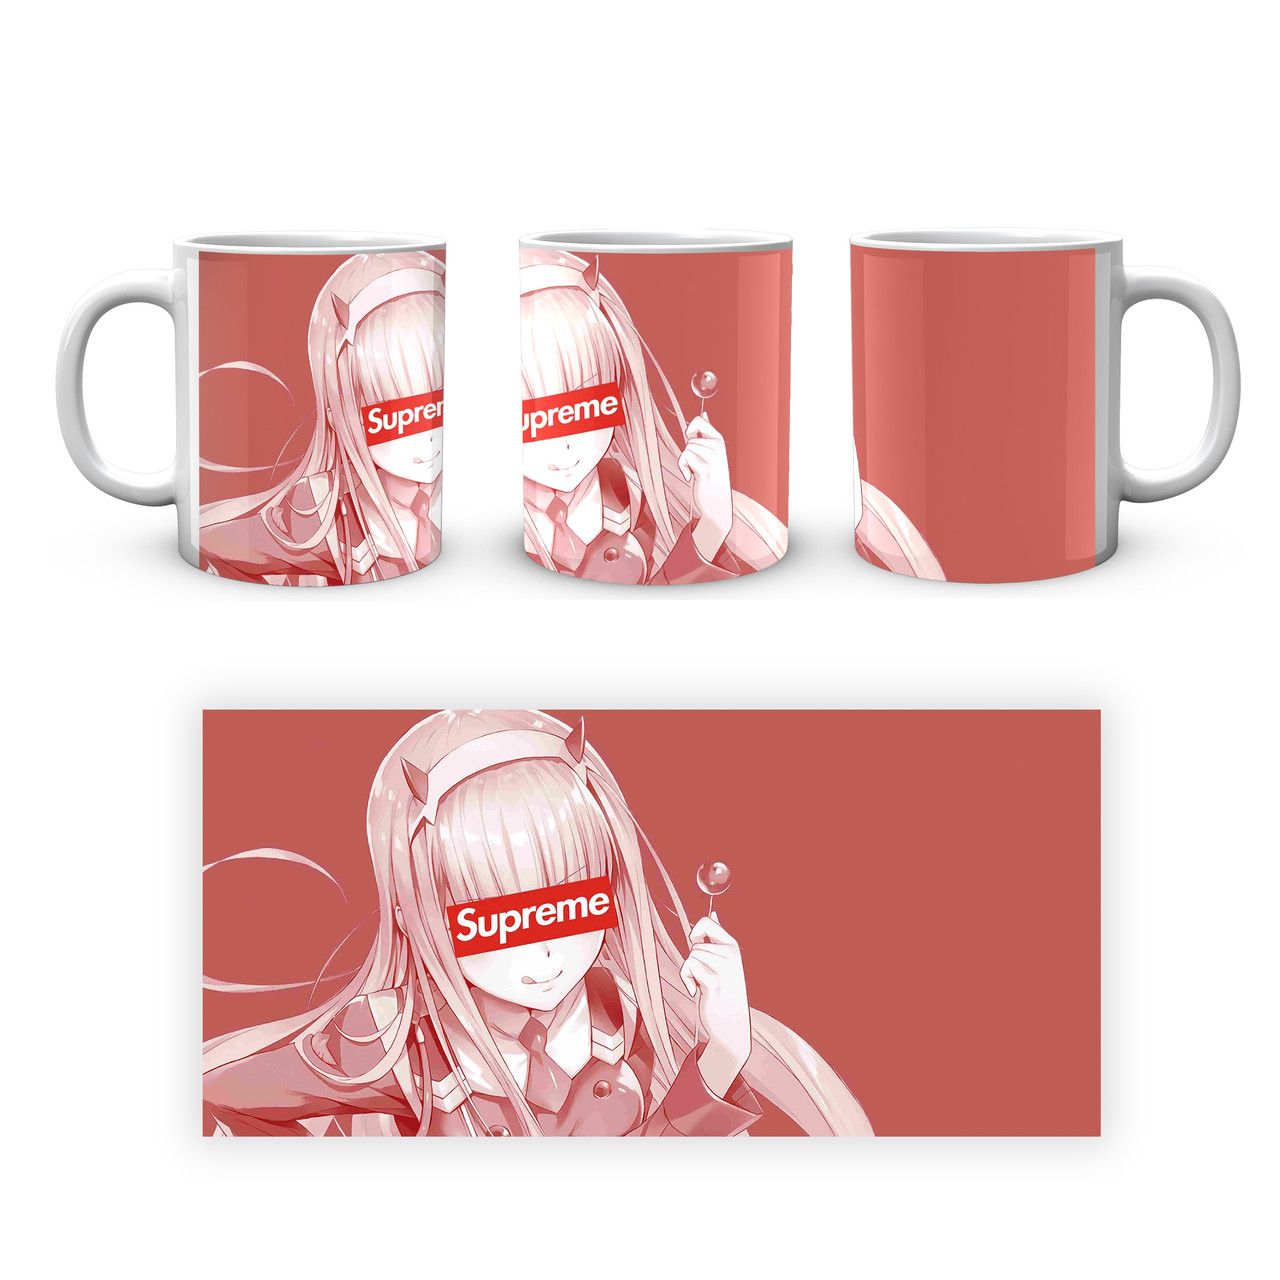 Кружка GeekLand Darling in the Franxx Любимый во Франксе red picture DF.02.08 - фото 4